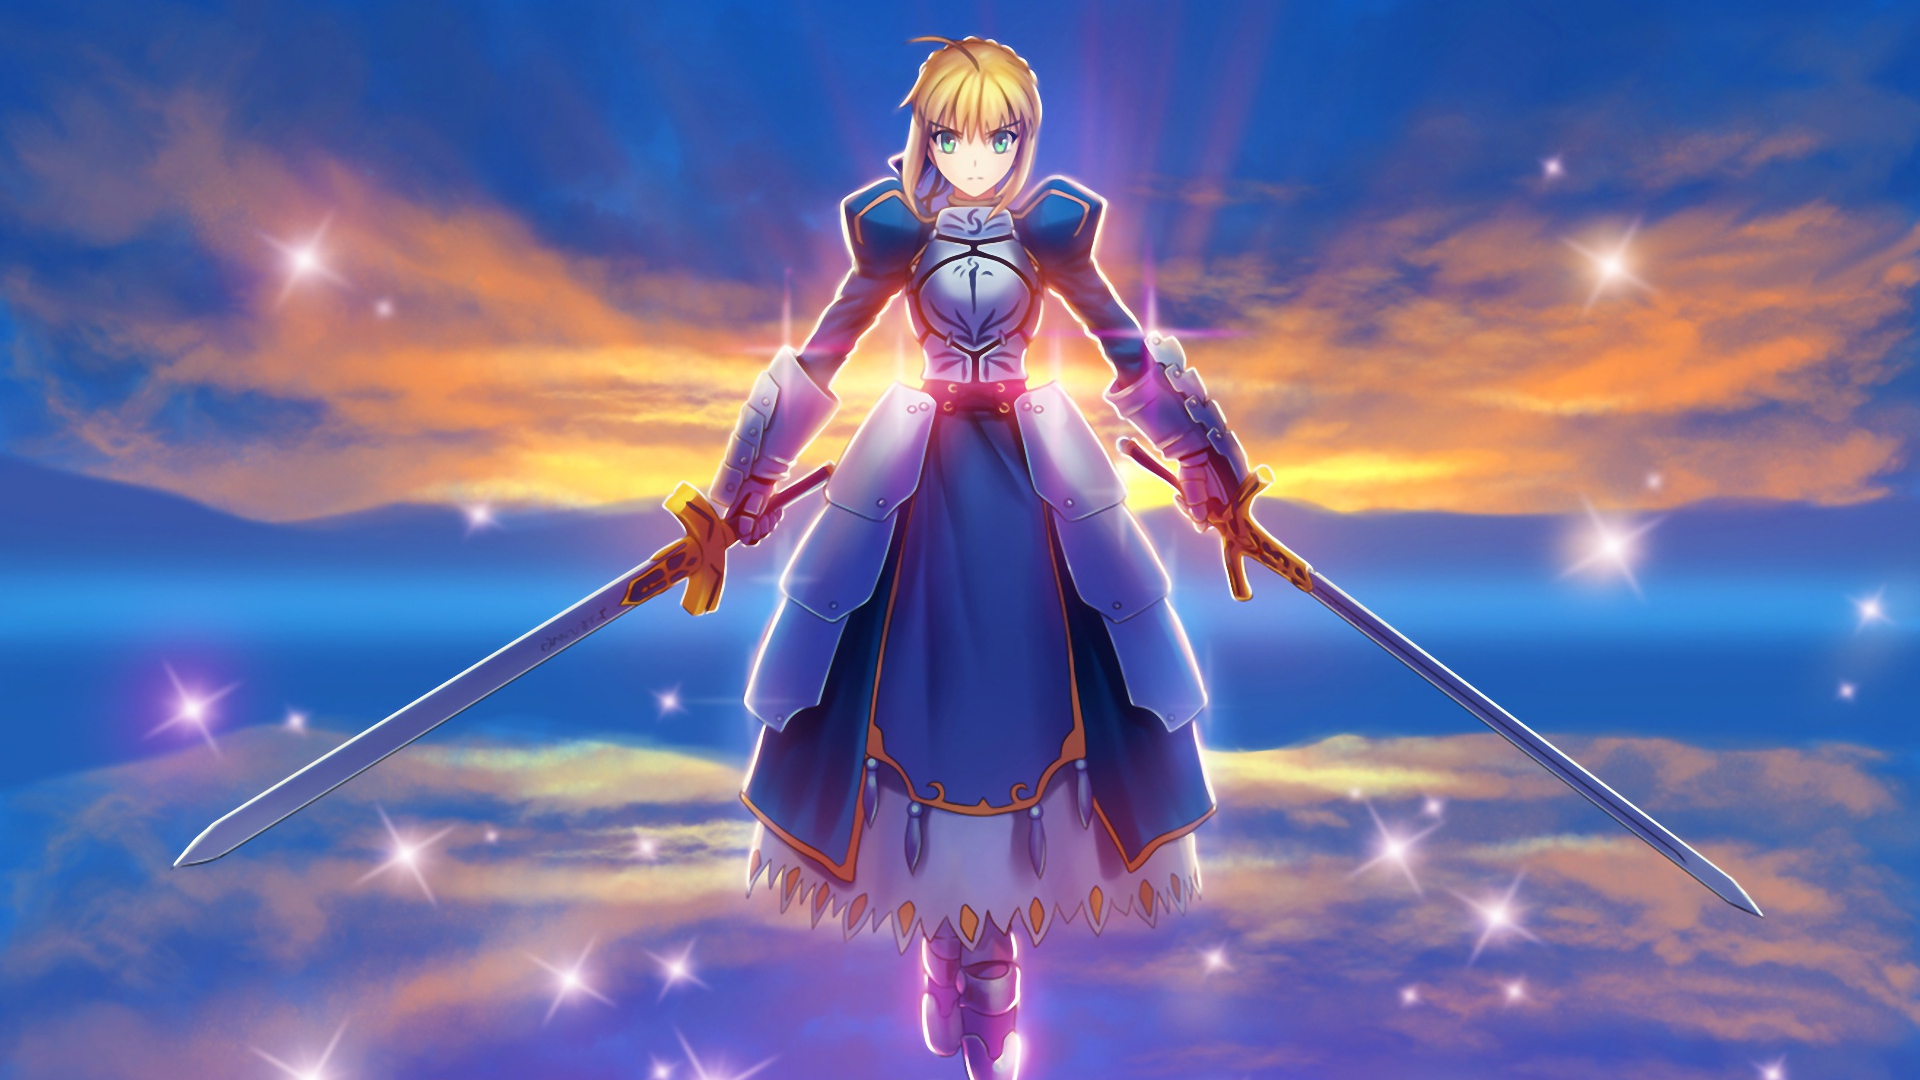 Download 1920x1080 Wallpaper Saber, Fate Series, Anime, Full Hd, Hdtv ...